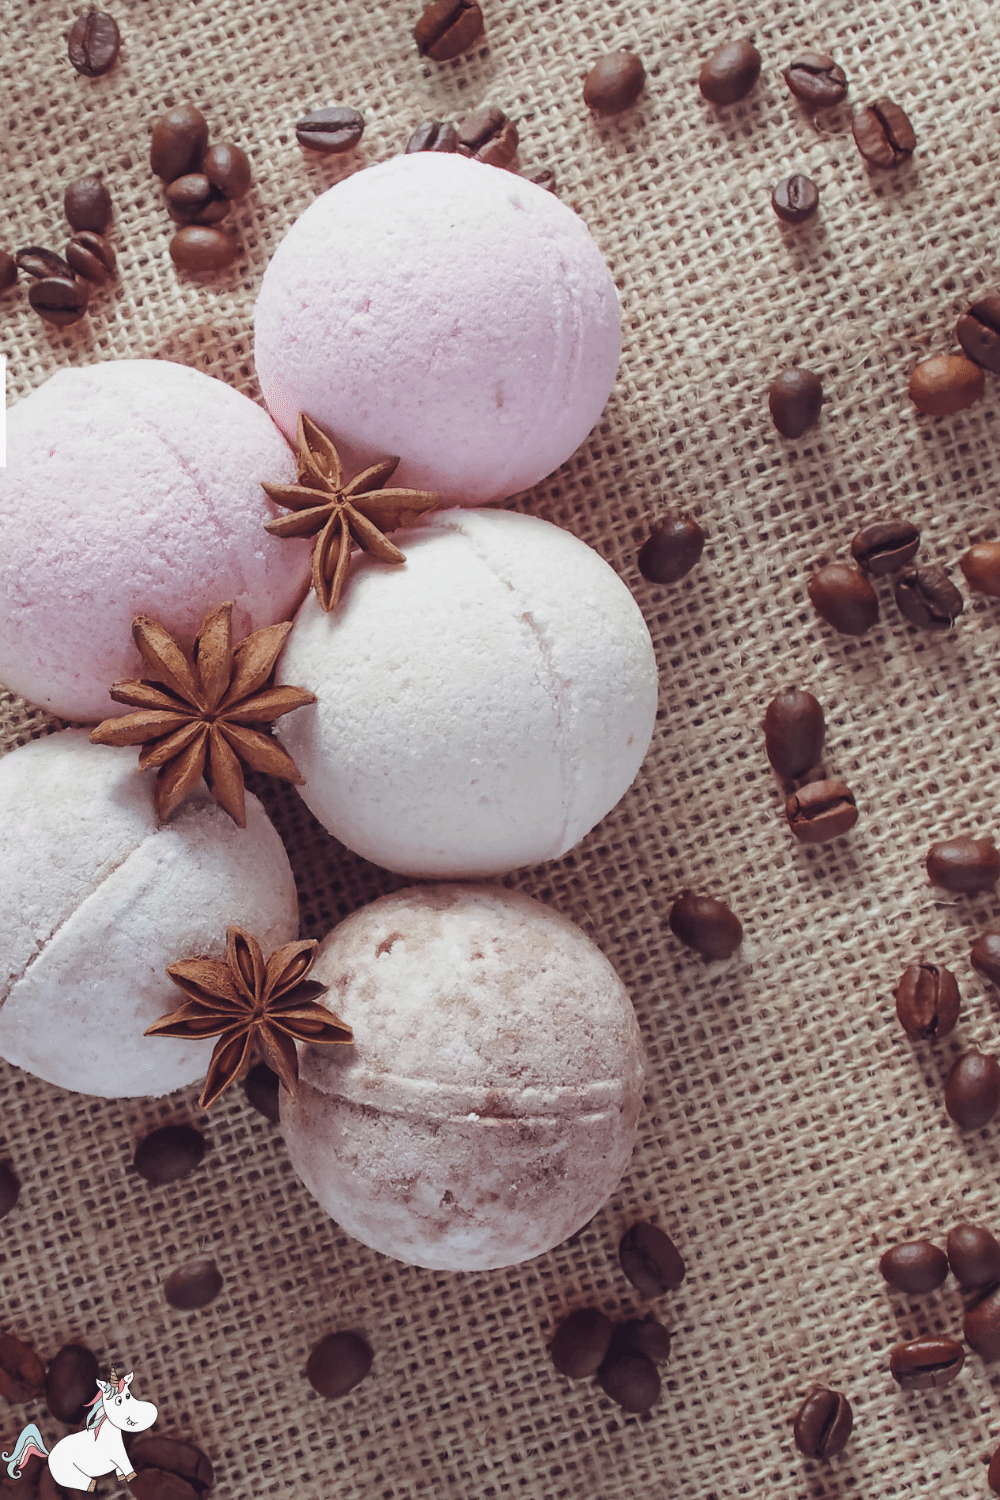 Bath bombs surrounded by coffee beans